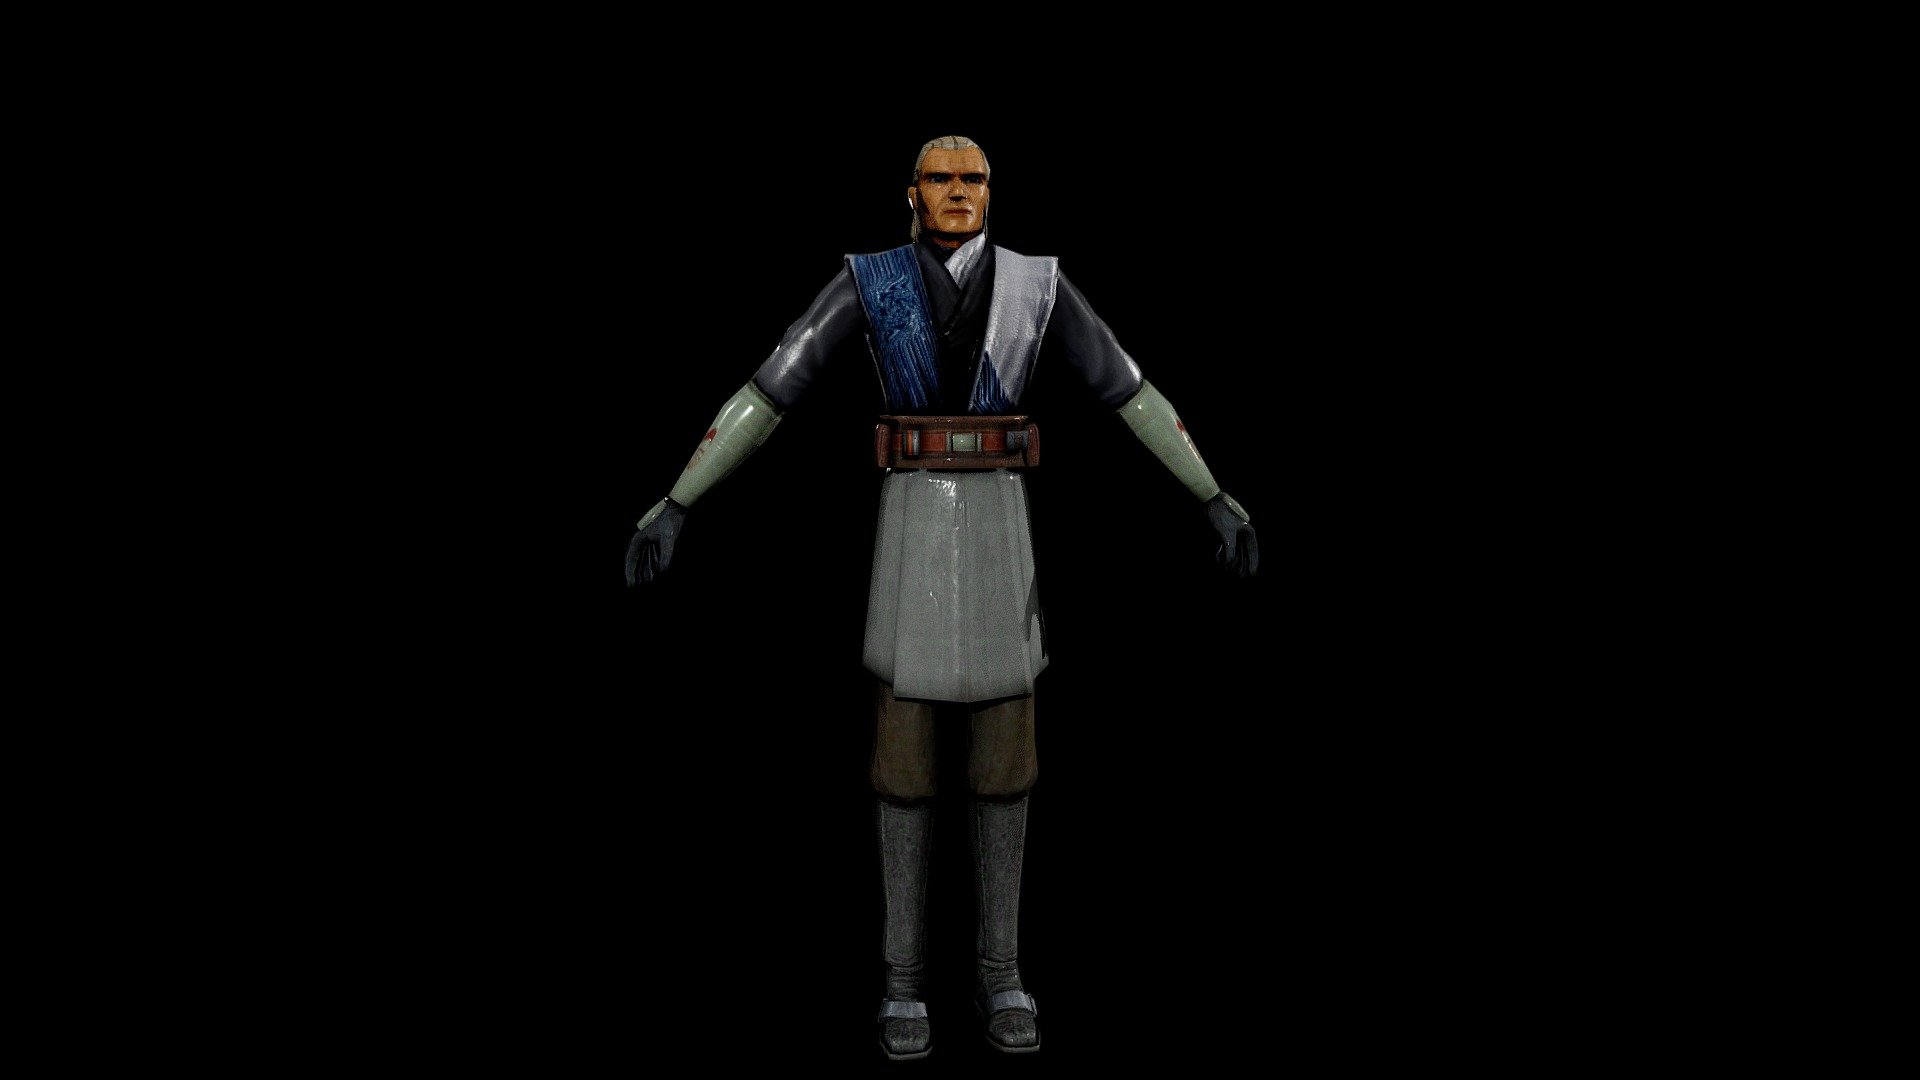 New texture For the head of the Jedi temple guard.
He protected the order and the temple gates from enemies until the end of his days - RCIN DRALIG - Download Free 3D model by Ima Gun Di (@imagandaiii) 3d model